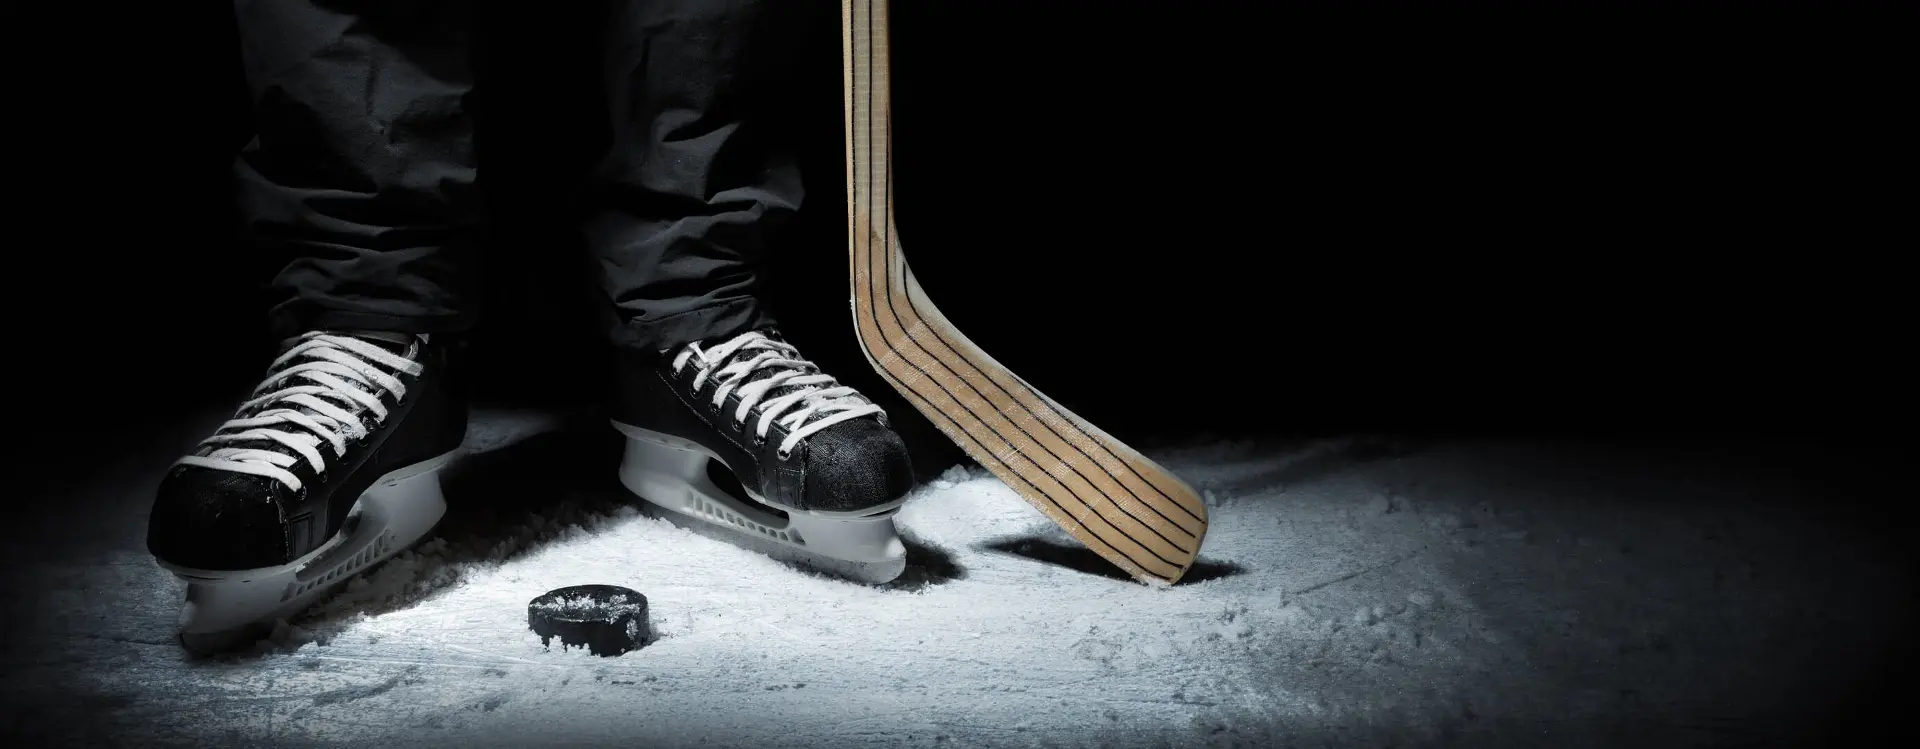 black hockey skates next to a puck and stick on ice rink